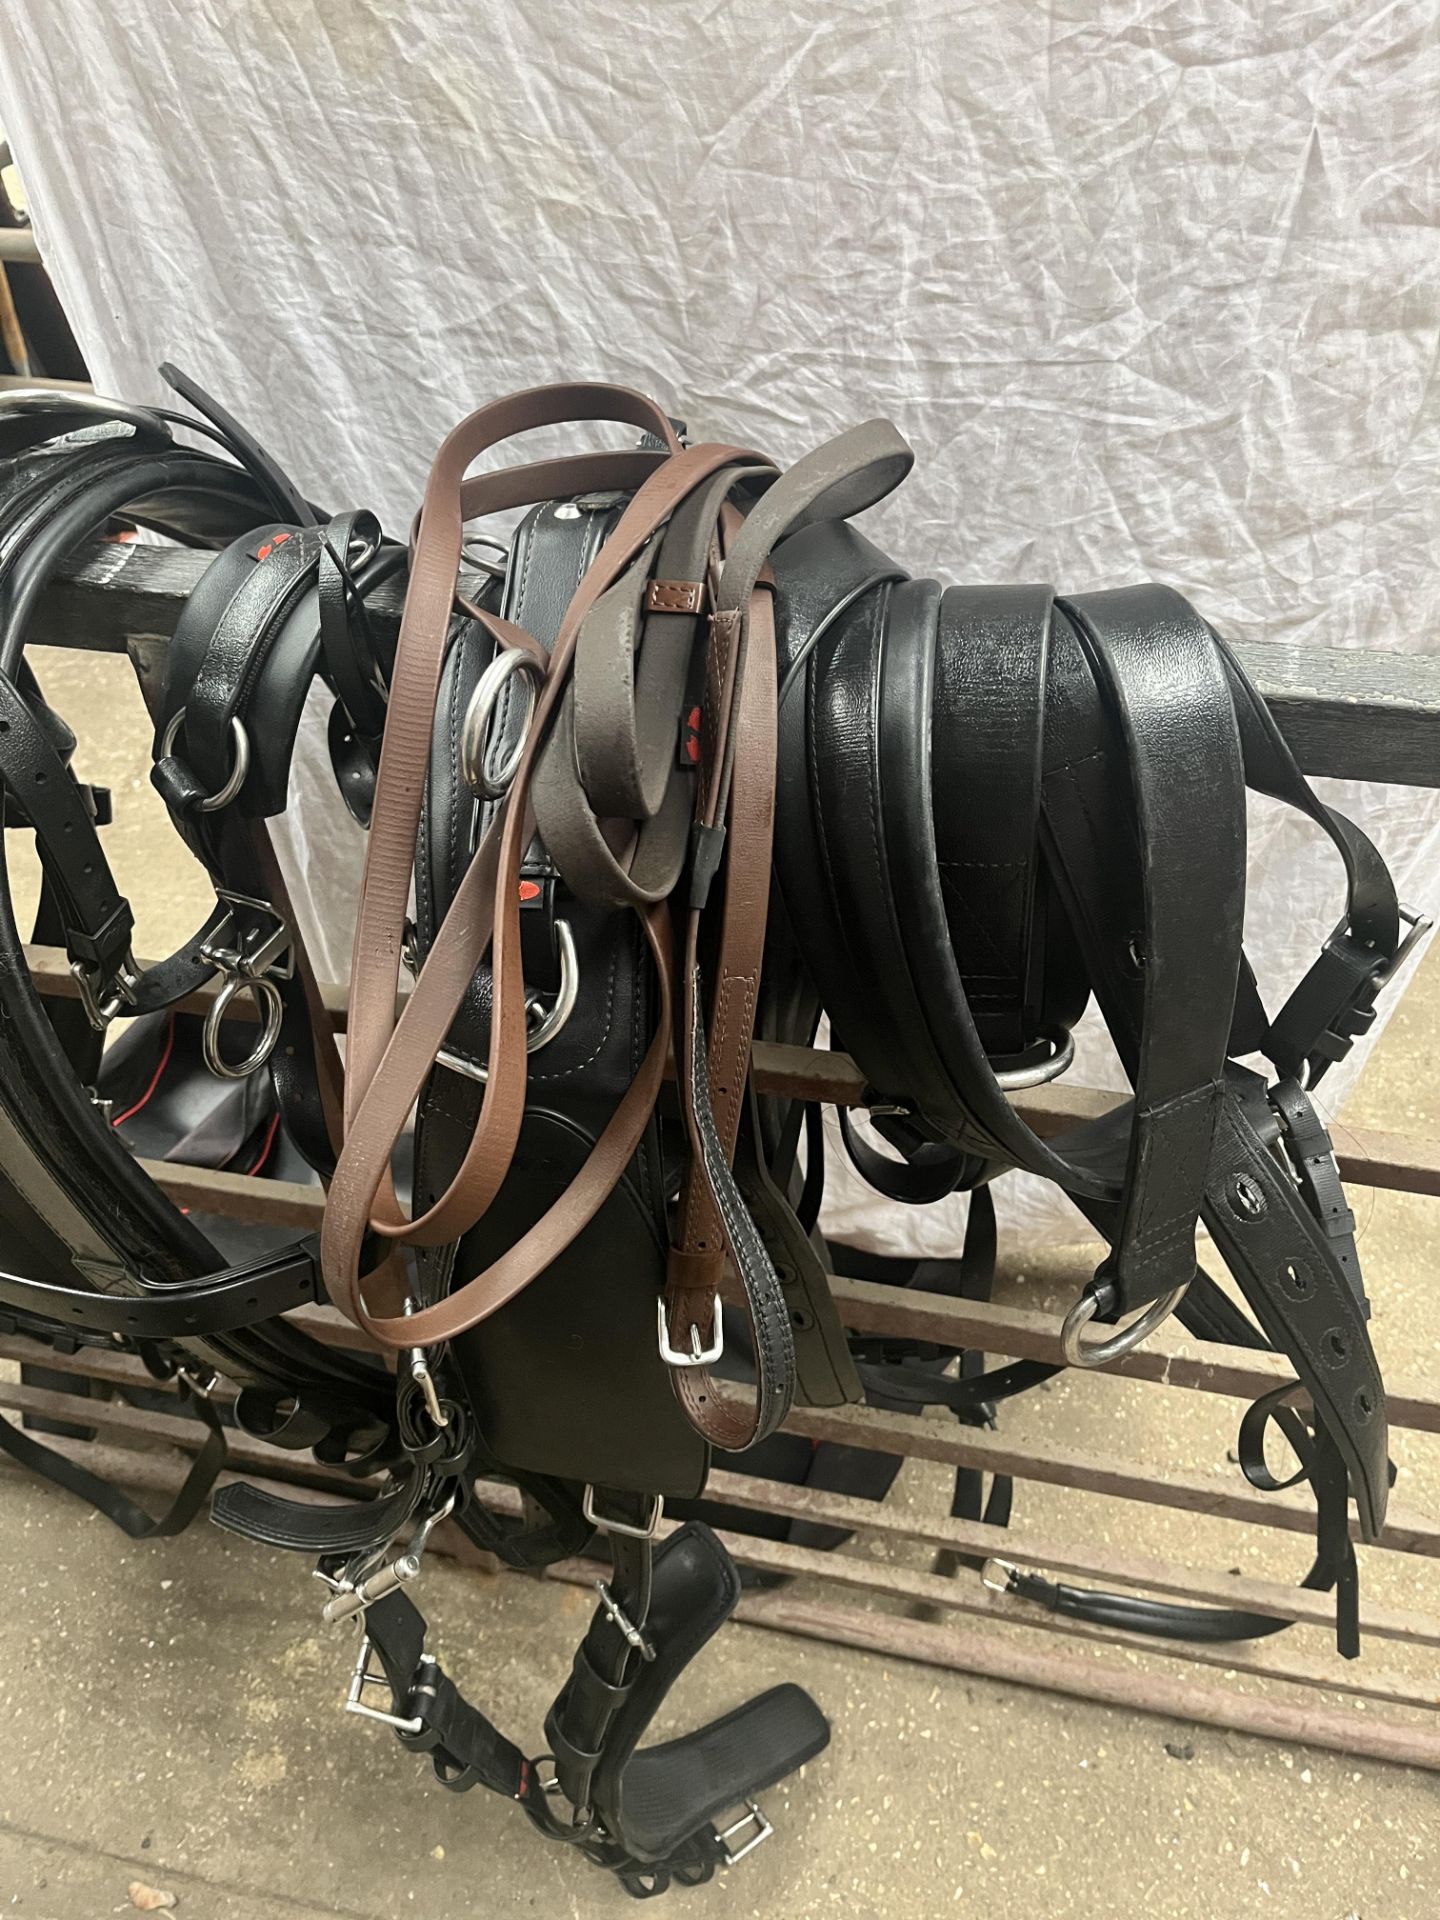 Full size classic Zilco pairs harness, complete set with harness bag - Bild 3 aus 5